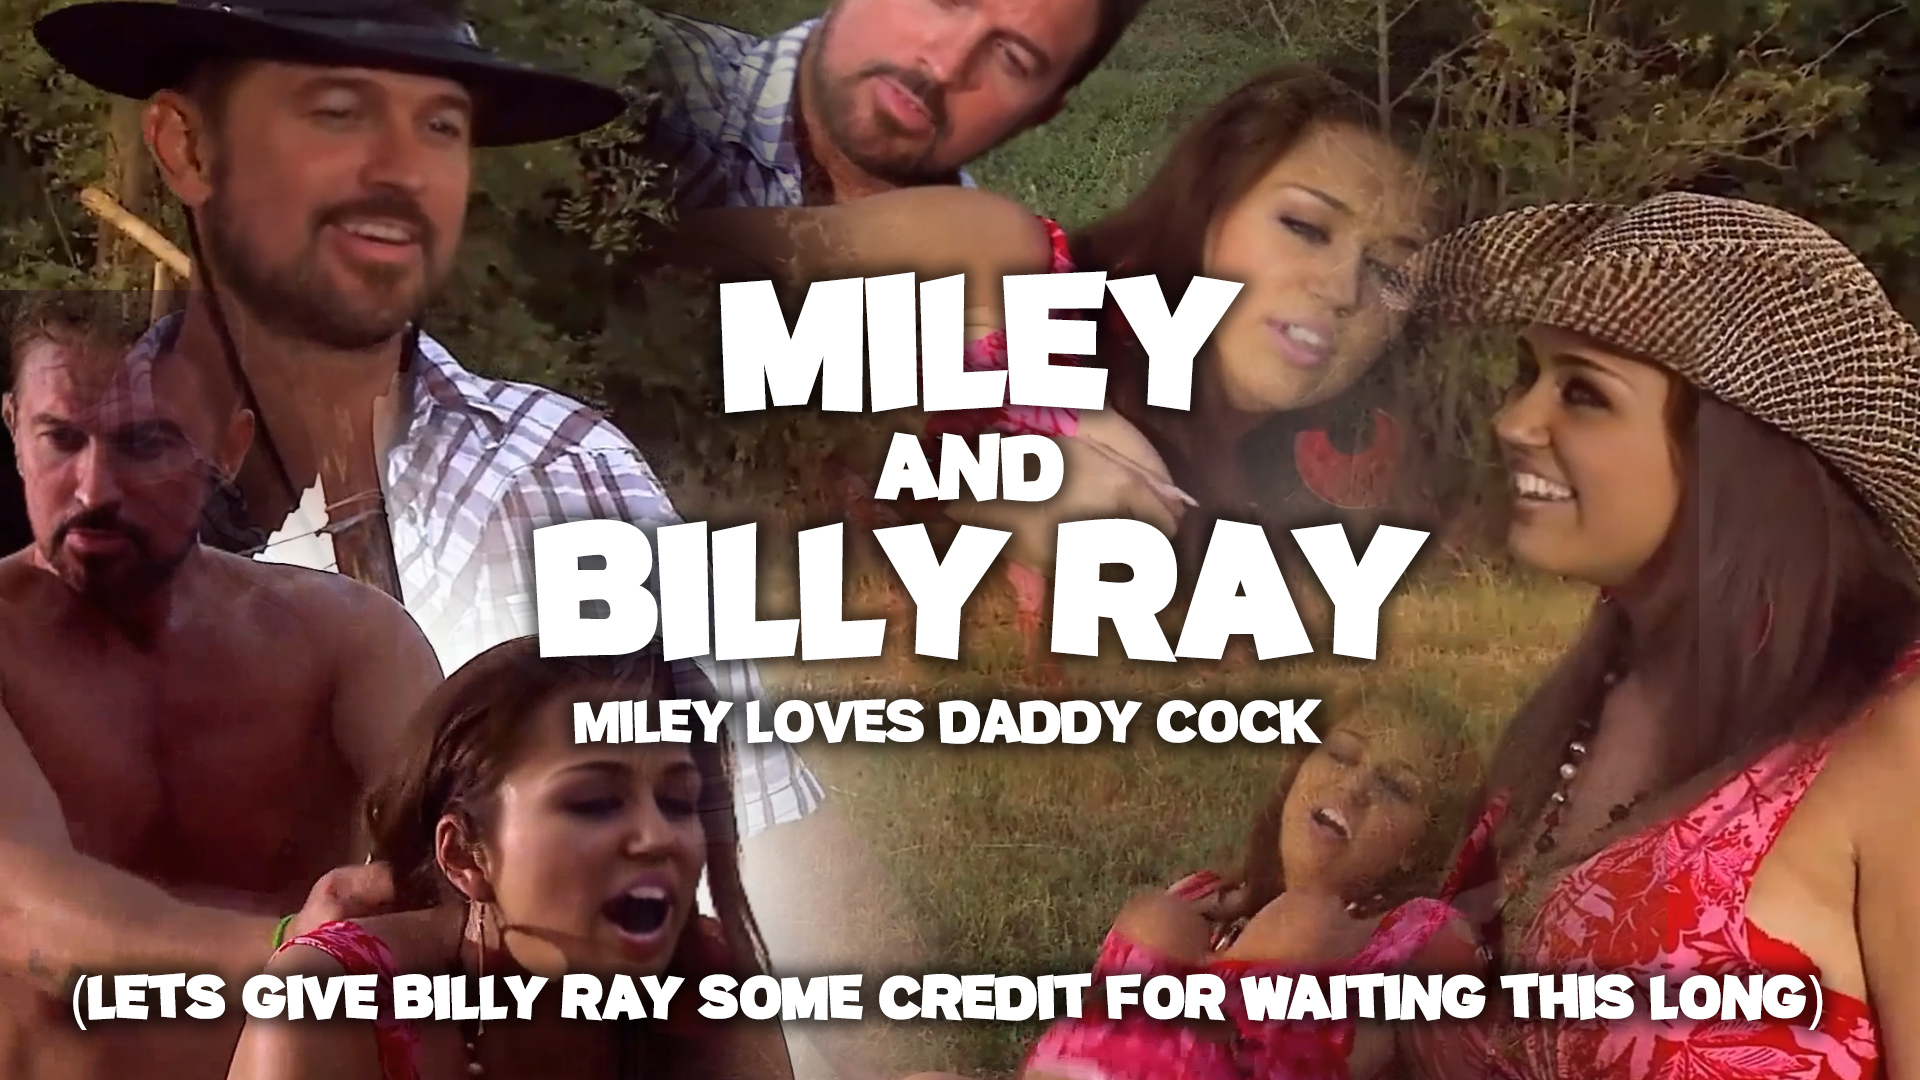 Miley and Dad! Miley loves daddy cock!